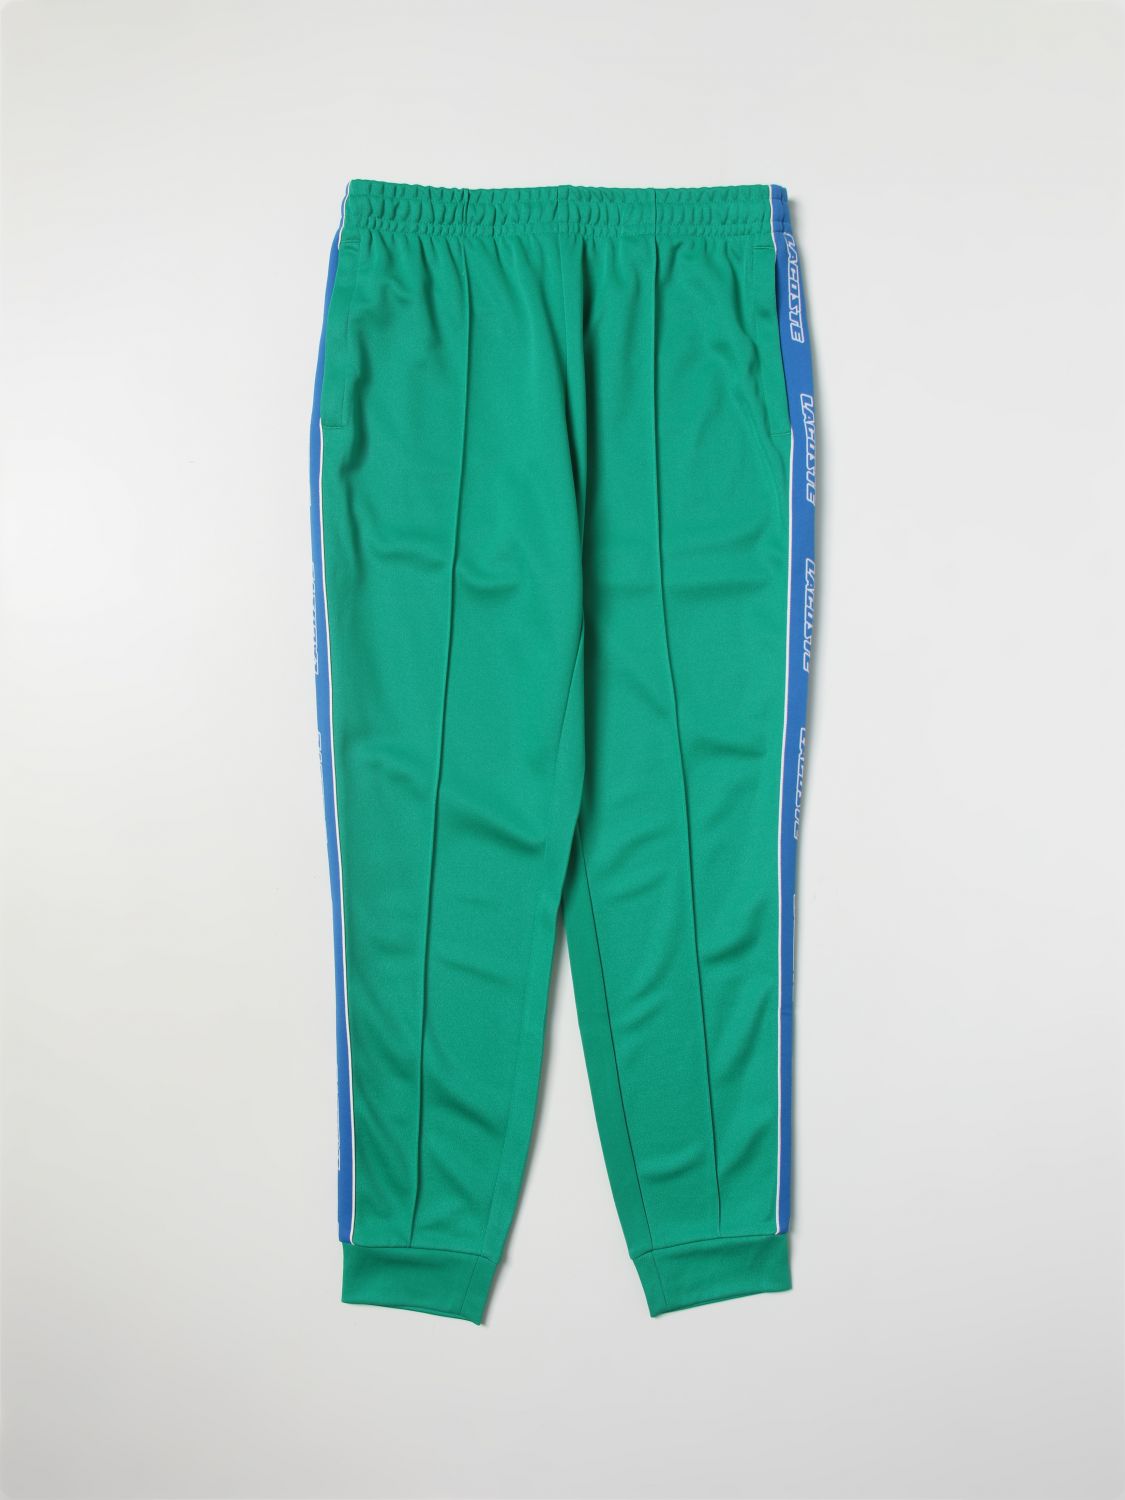 LACOSTE: pants for boys - Green | Lacoste pants XH0095 online on GIGLIO.COM